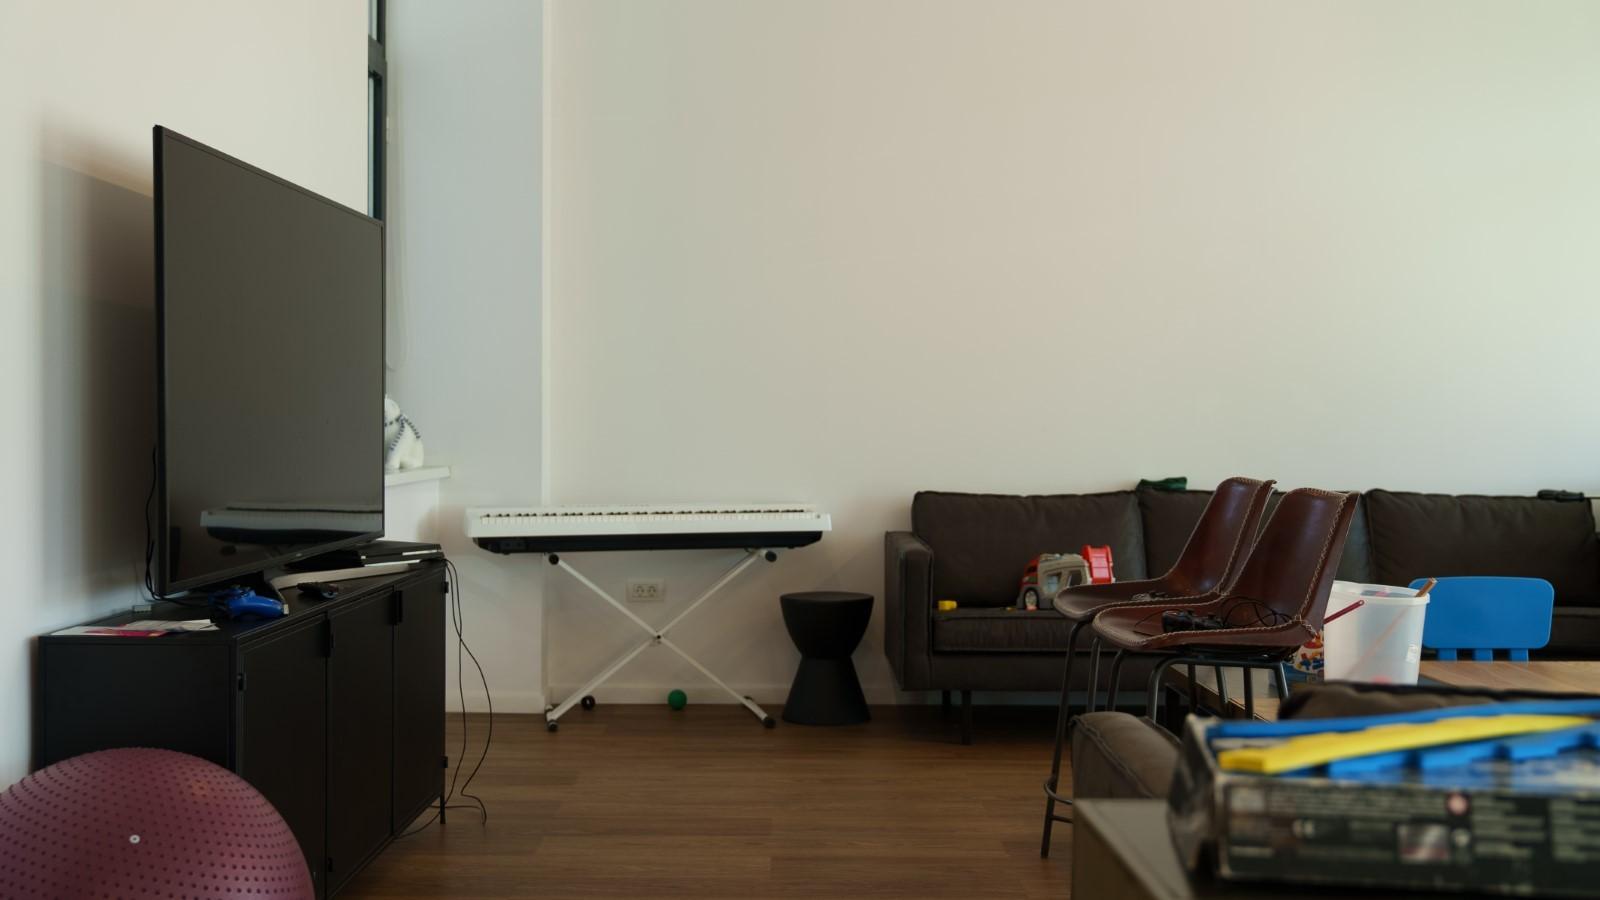 Picture of a space showing a TV, keyboard, couch, and table.